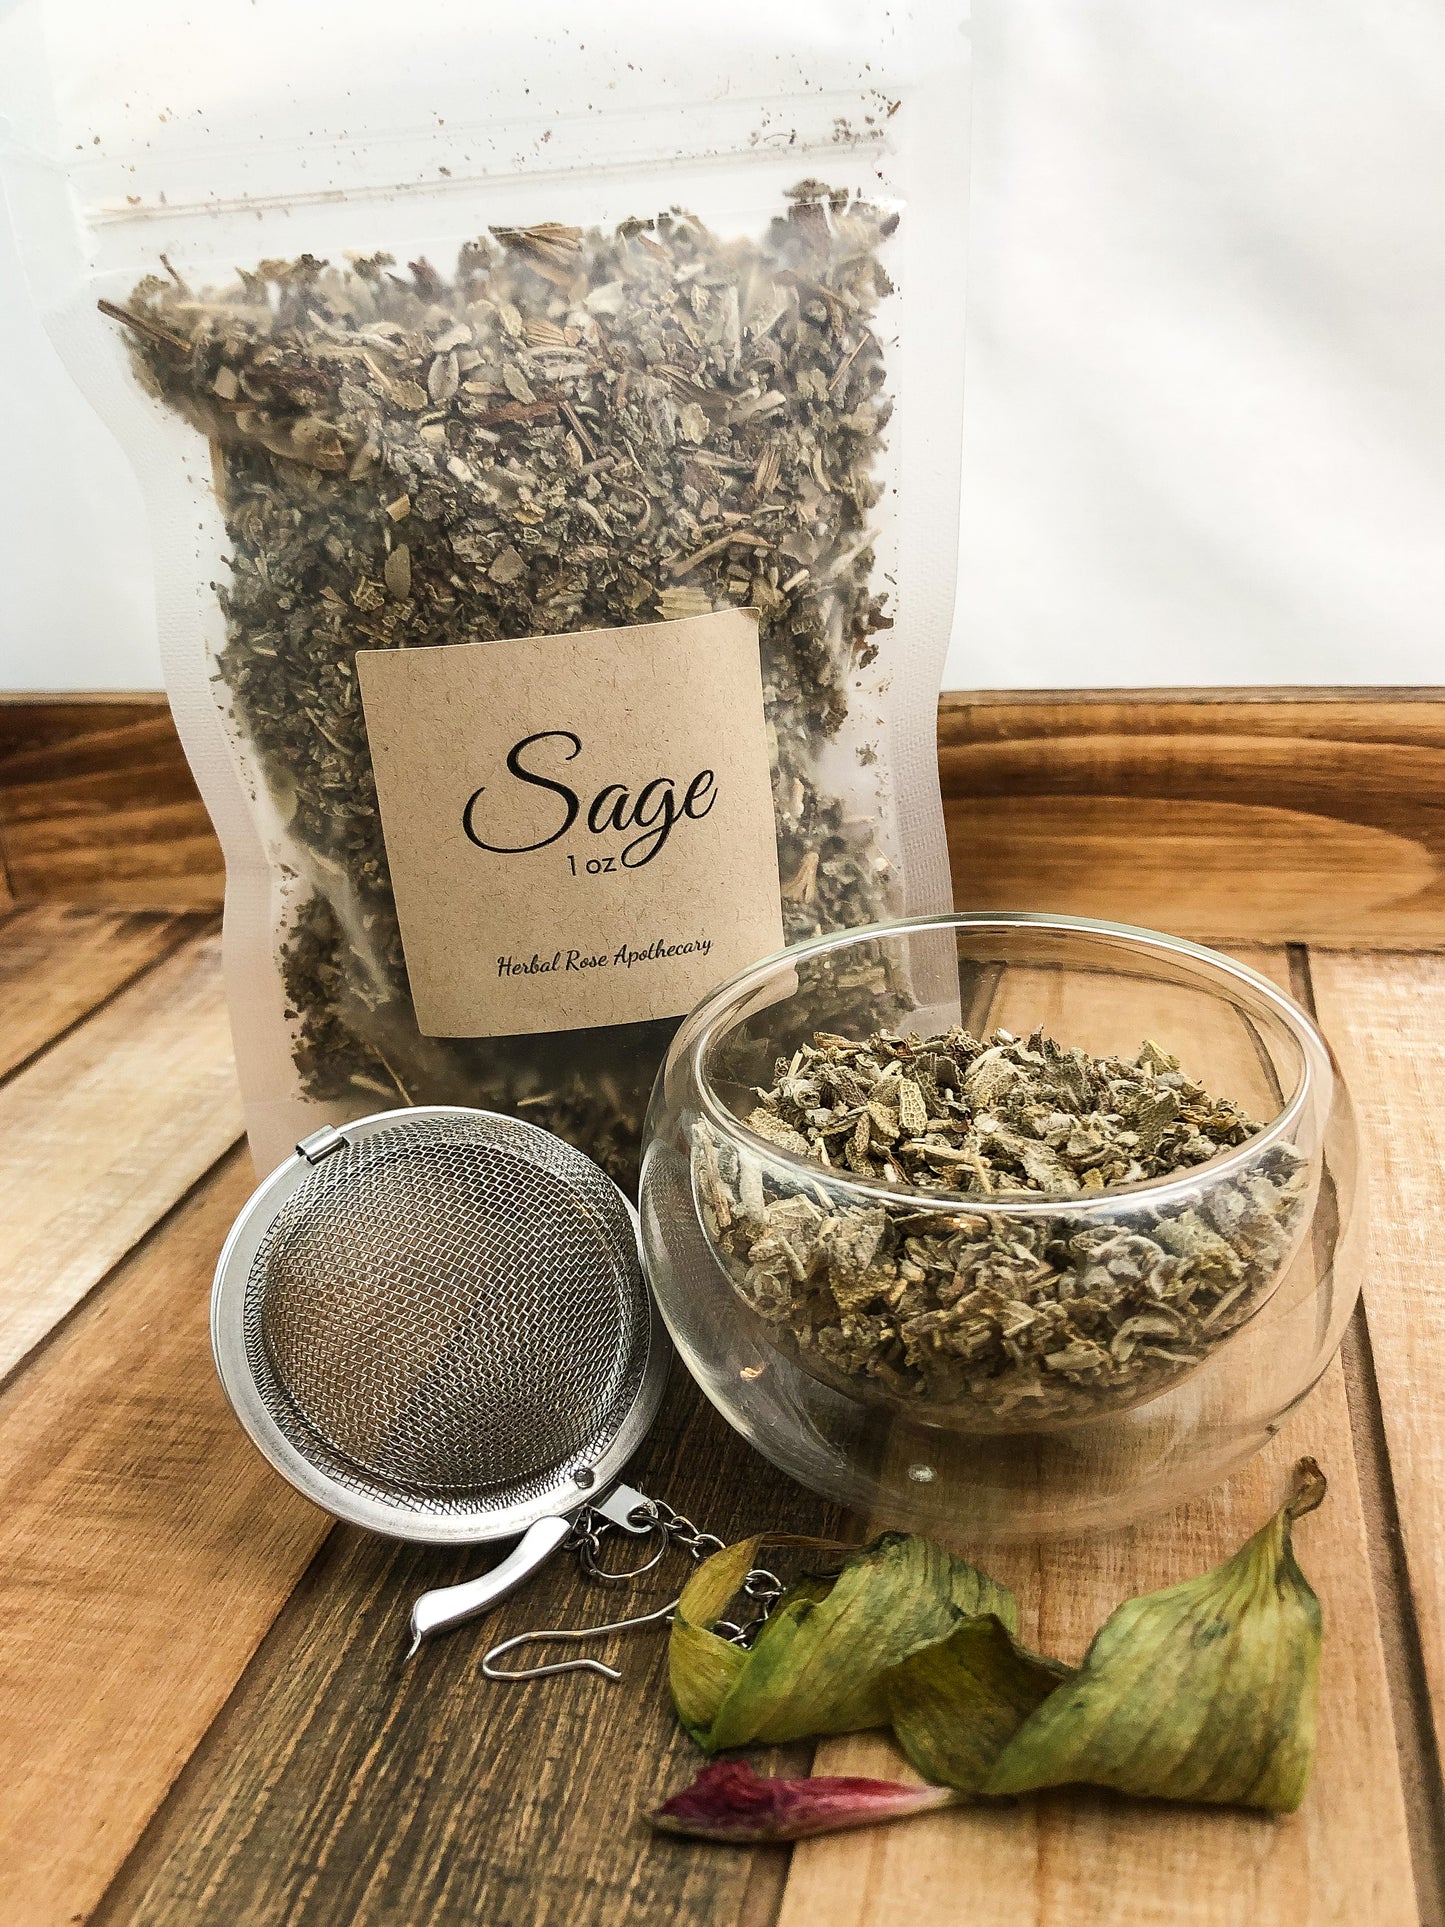 image of 1oz bag of dried sage next to dried sage in a clear glass cup and a mesh tea infuser with wilting flowers in front, white background and items on a wooden table